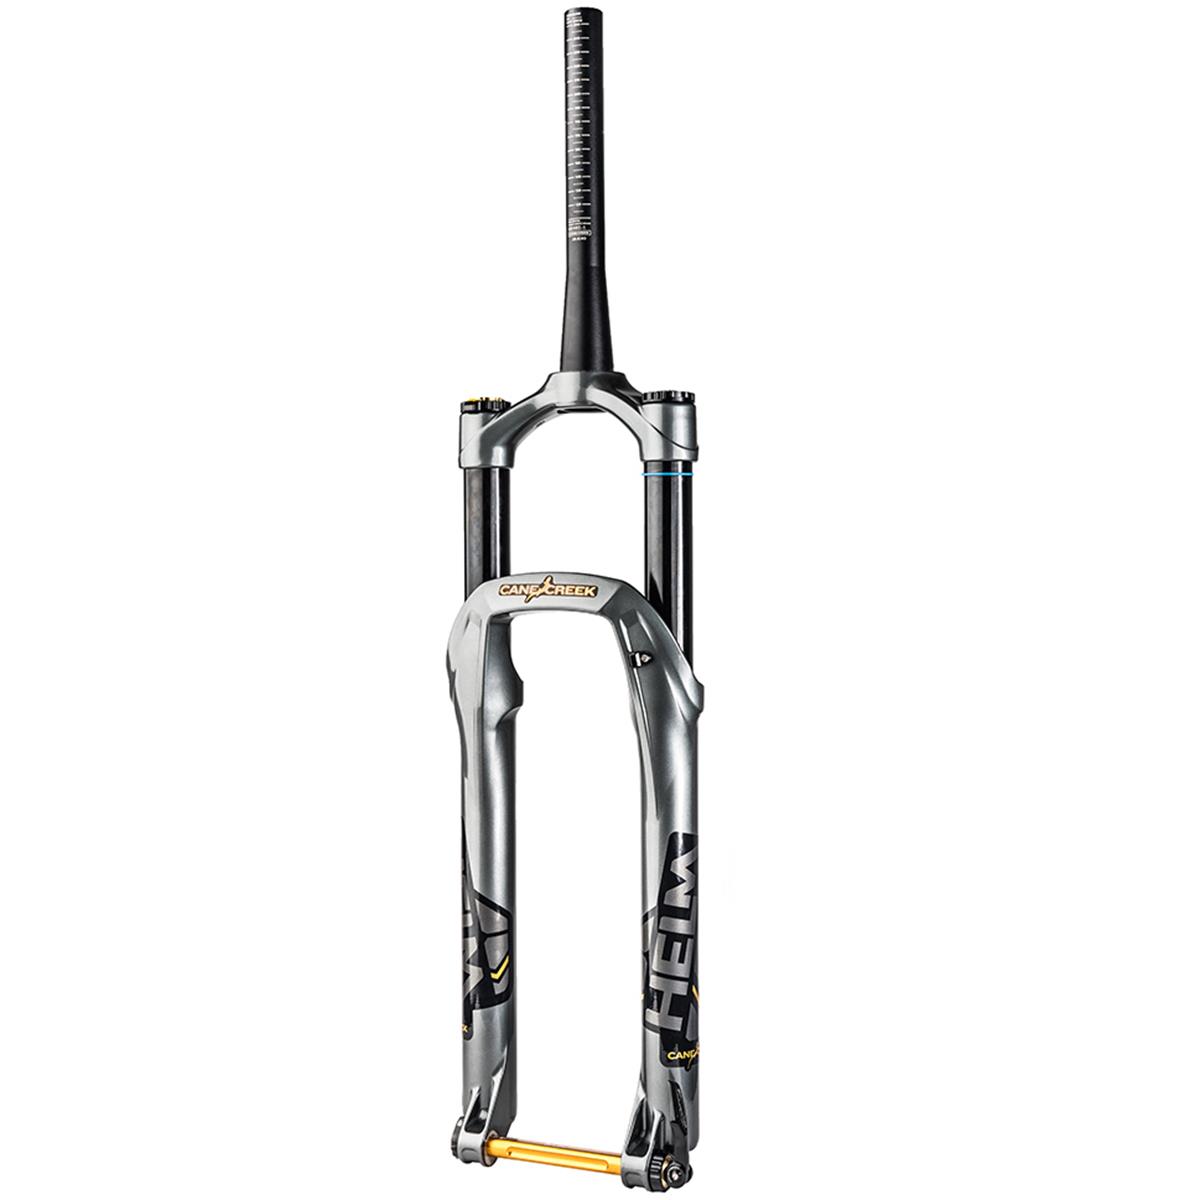 Cane Creek Suspension Fork Helm Coil Boost Gun Metal Grey, 29 Inches, Tapered, 15 x 110 mm (Boost)